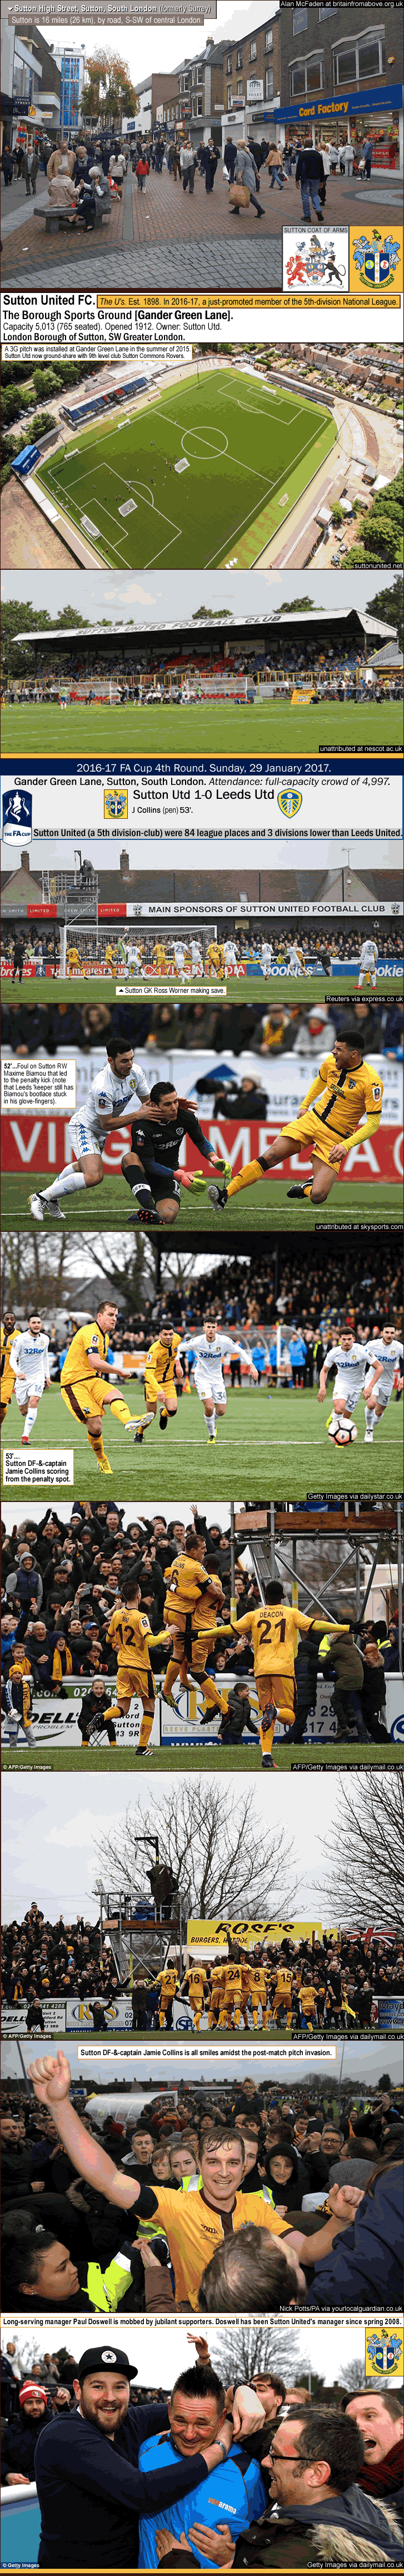 sutton-utd_1-0_leeds-utd_2016-17-fa-cup_4th-round_jamie-collins-goal_manager-paul-doswell_i_.gif